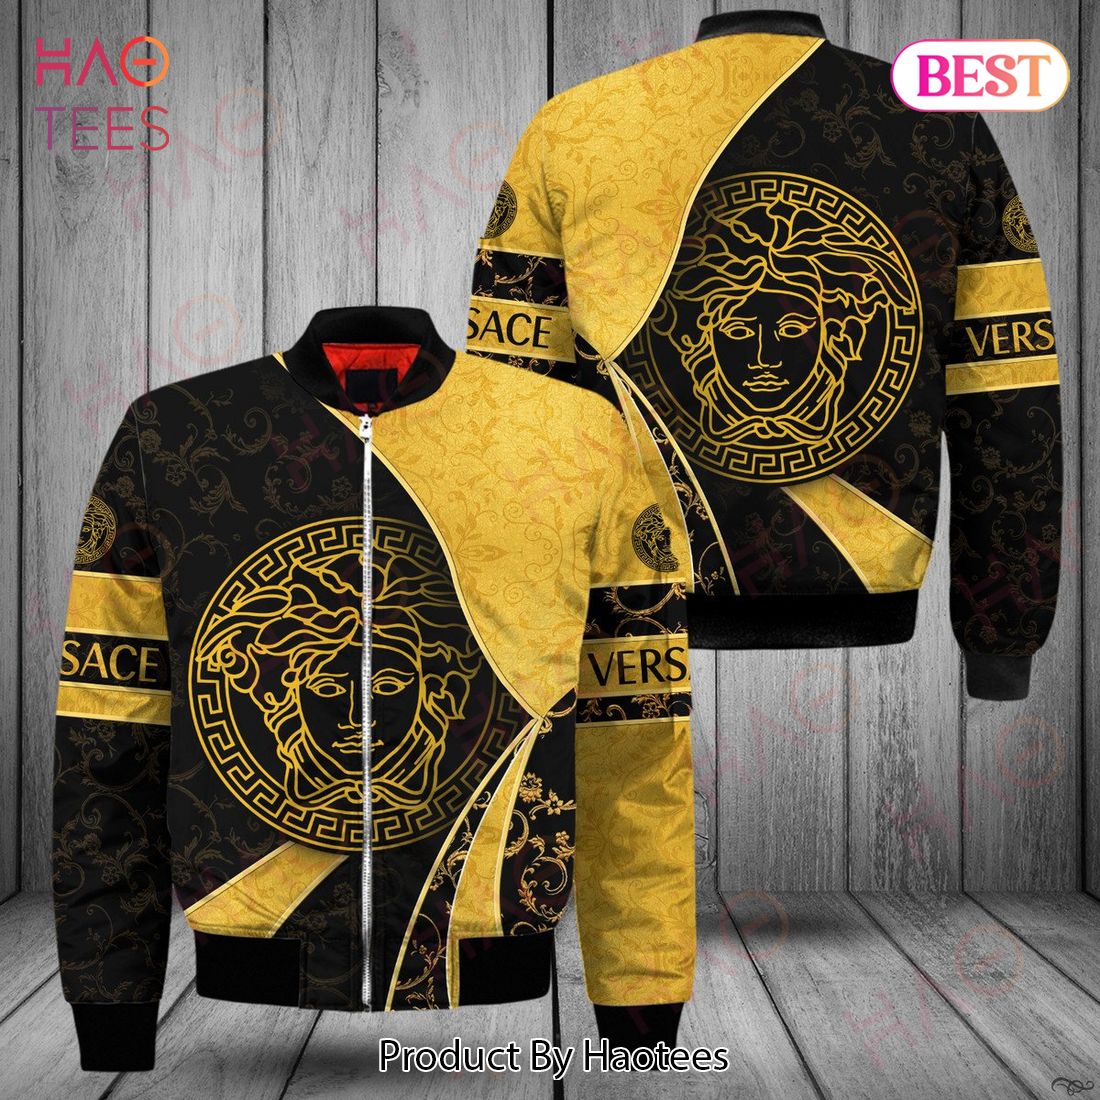 VS Yellow Bomber Jacket Luxury Brand Clothing Clothes Outfit